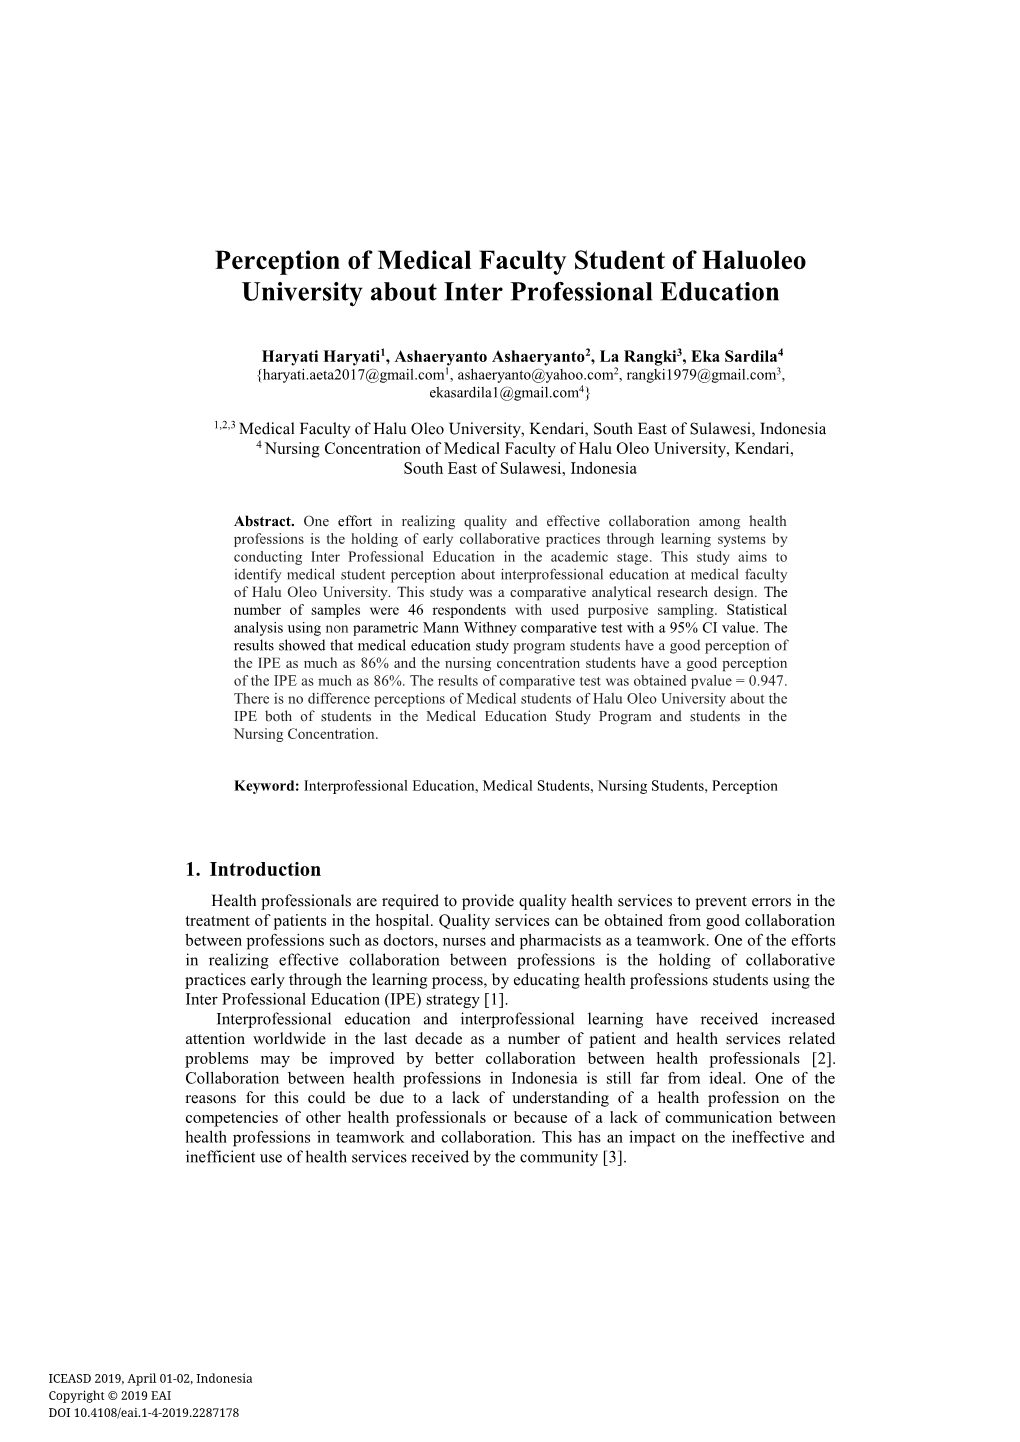 Perception of Medical Faculty Student of Haluoleo University About Inter Professional Education